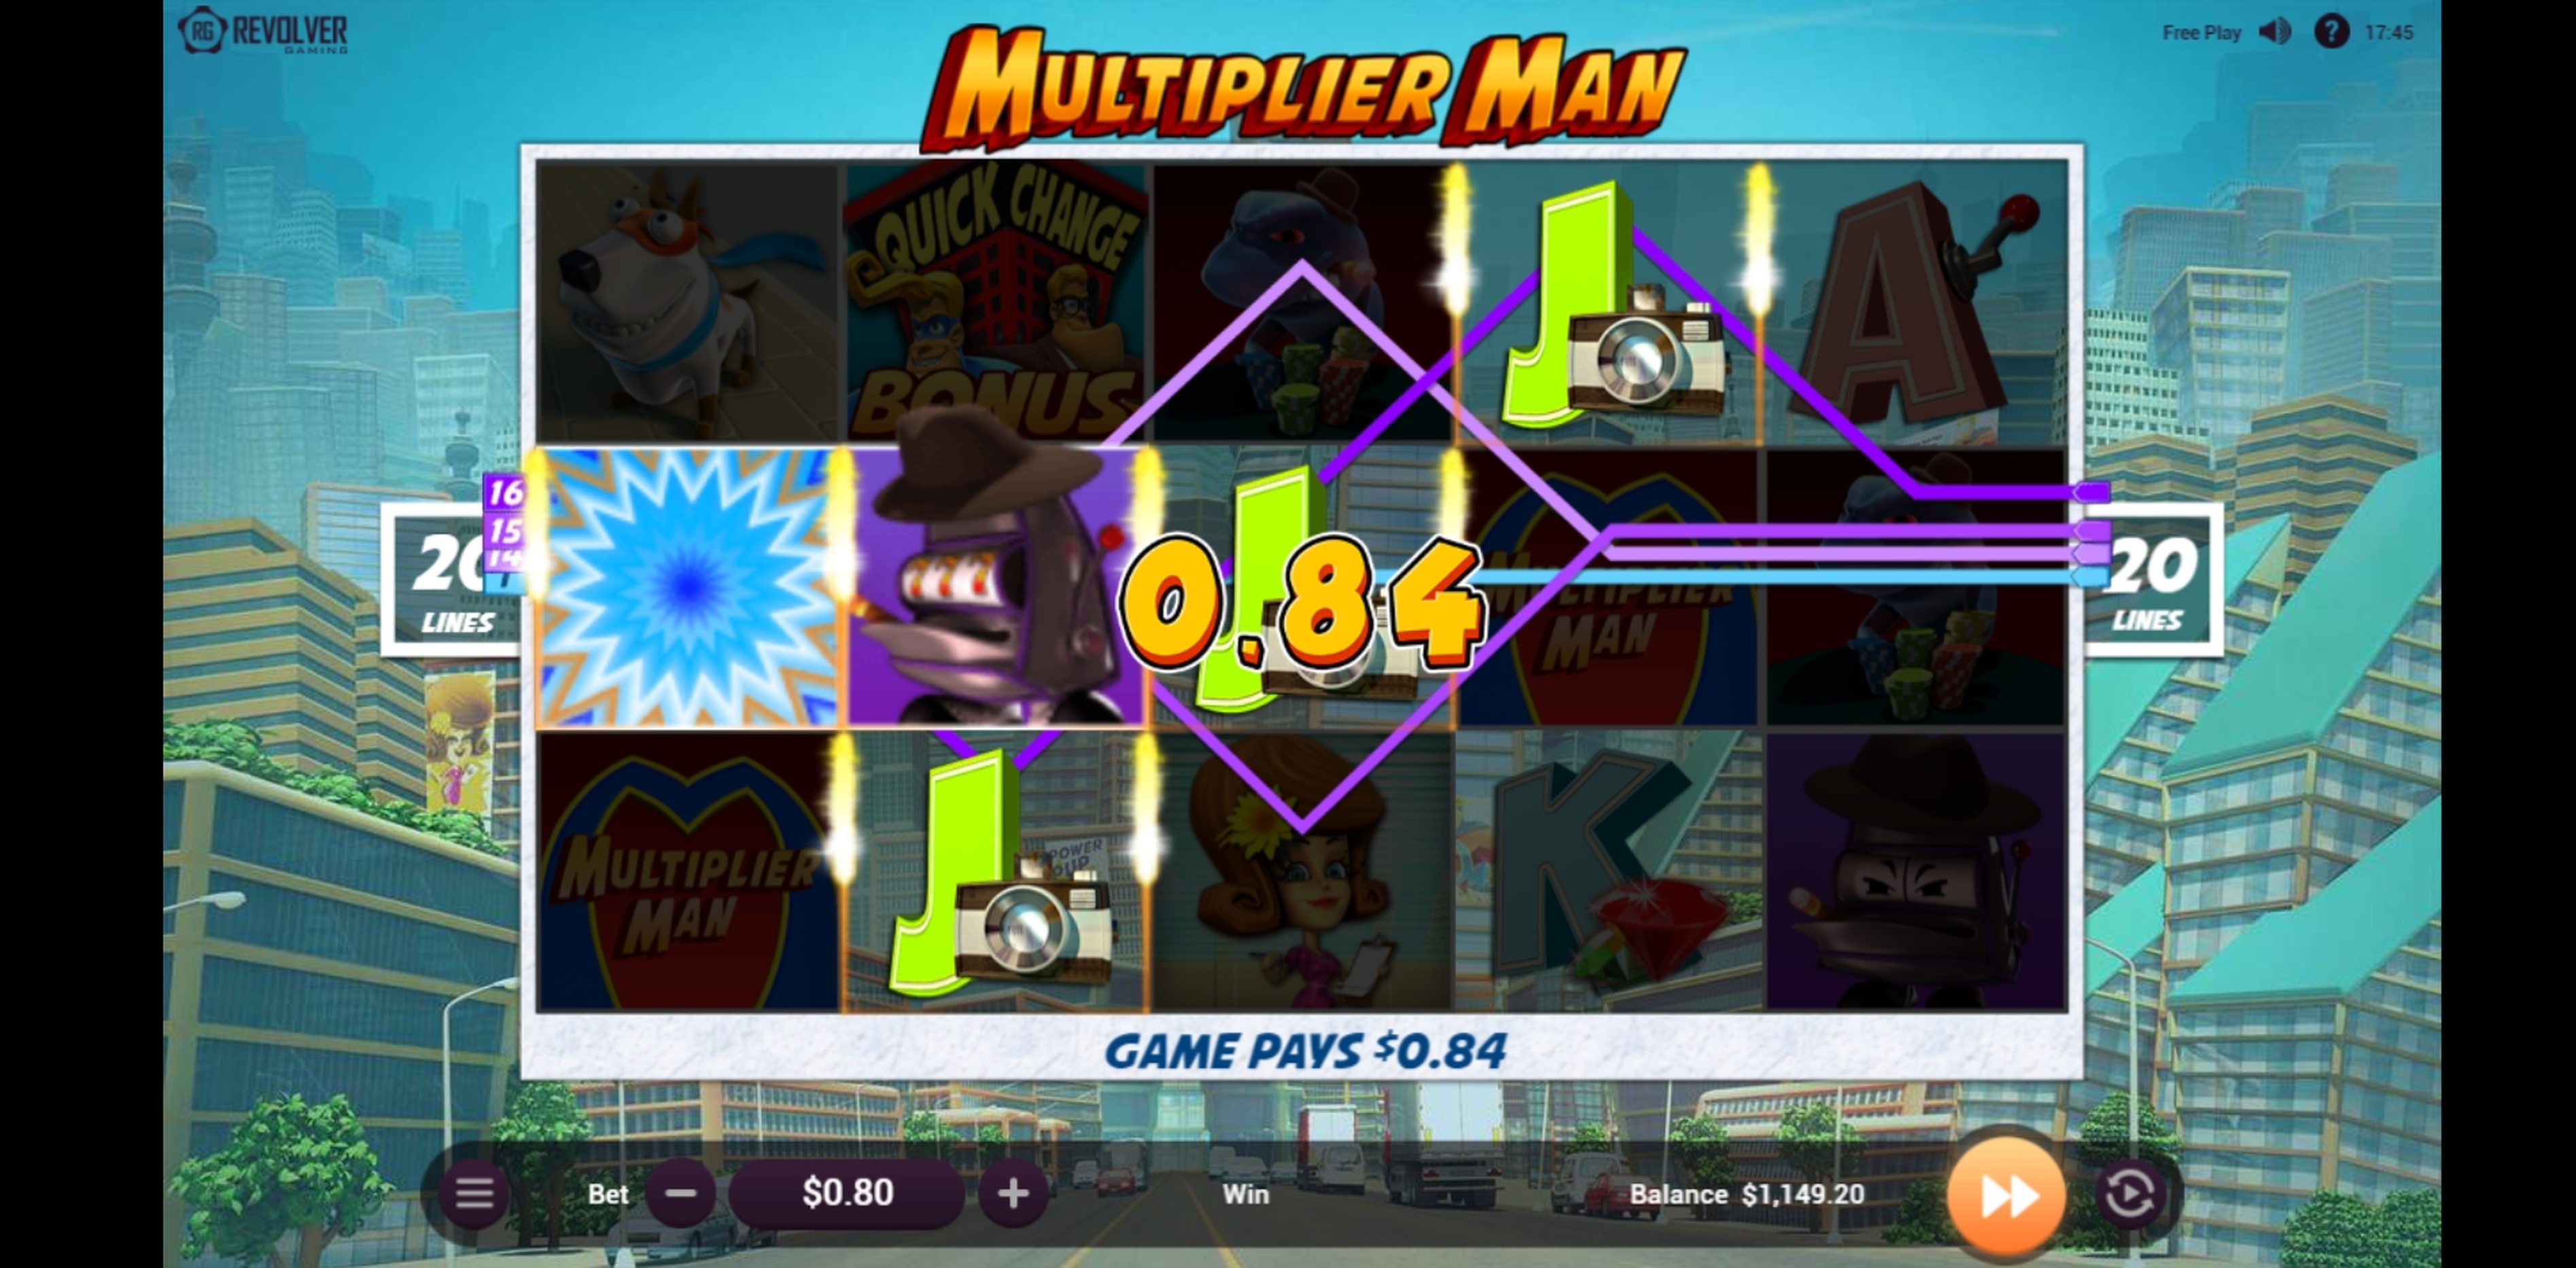 Win Money in Multiplier Man Free Slot Game by Revolver Gaming